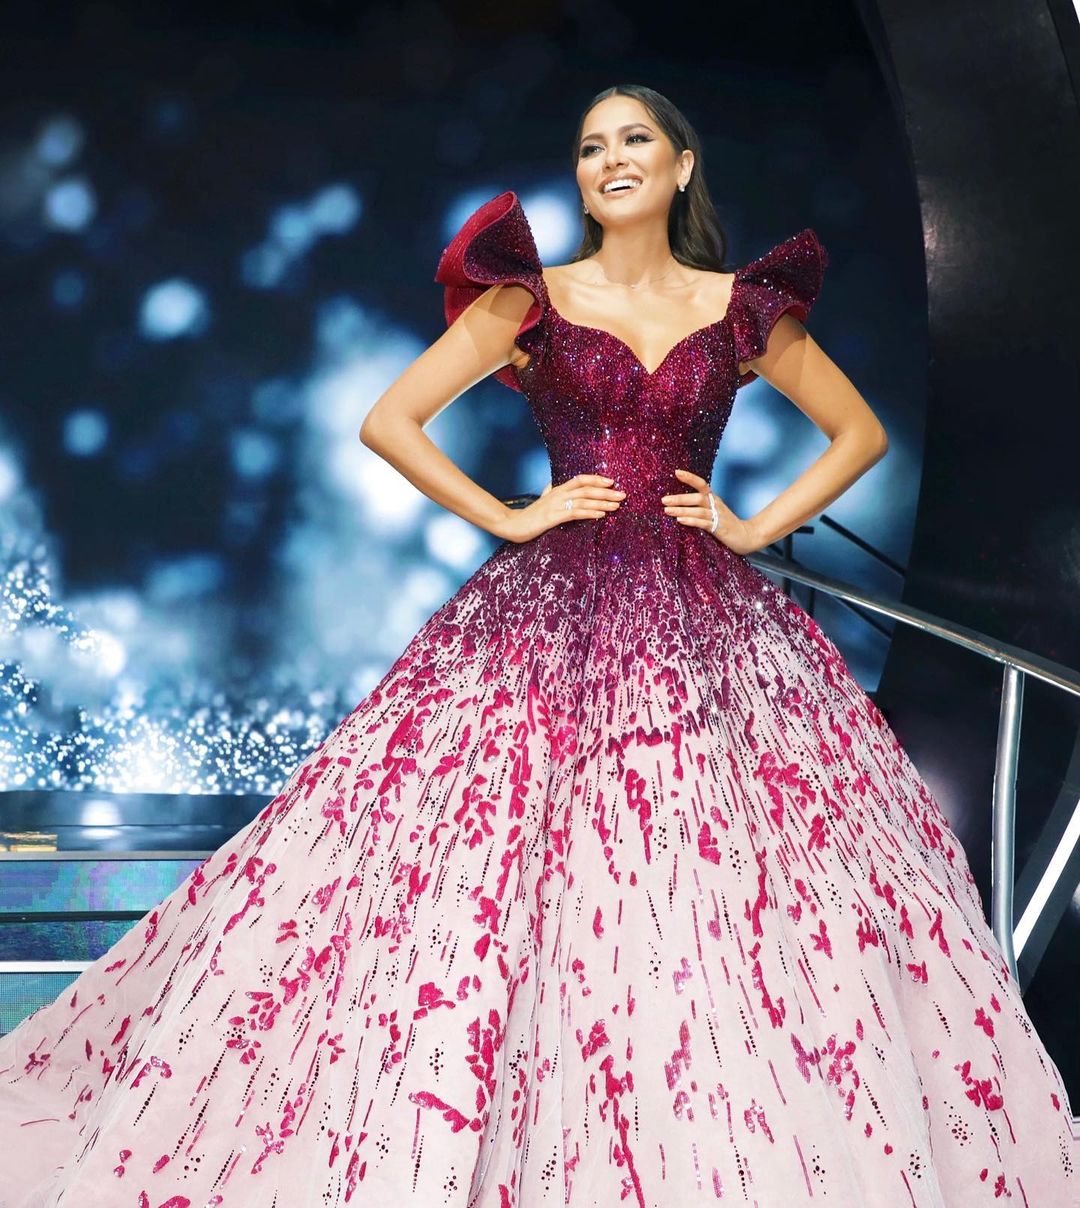 Filipino Designers Reveal What Makes a Winning Miss Universe Gown